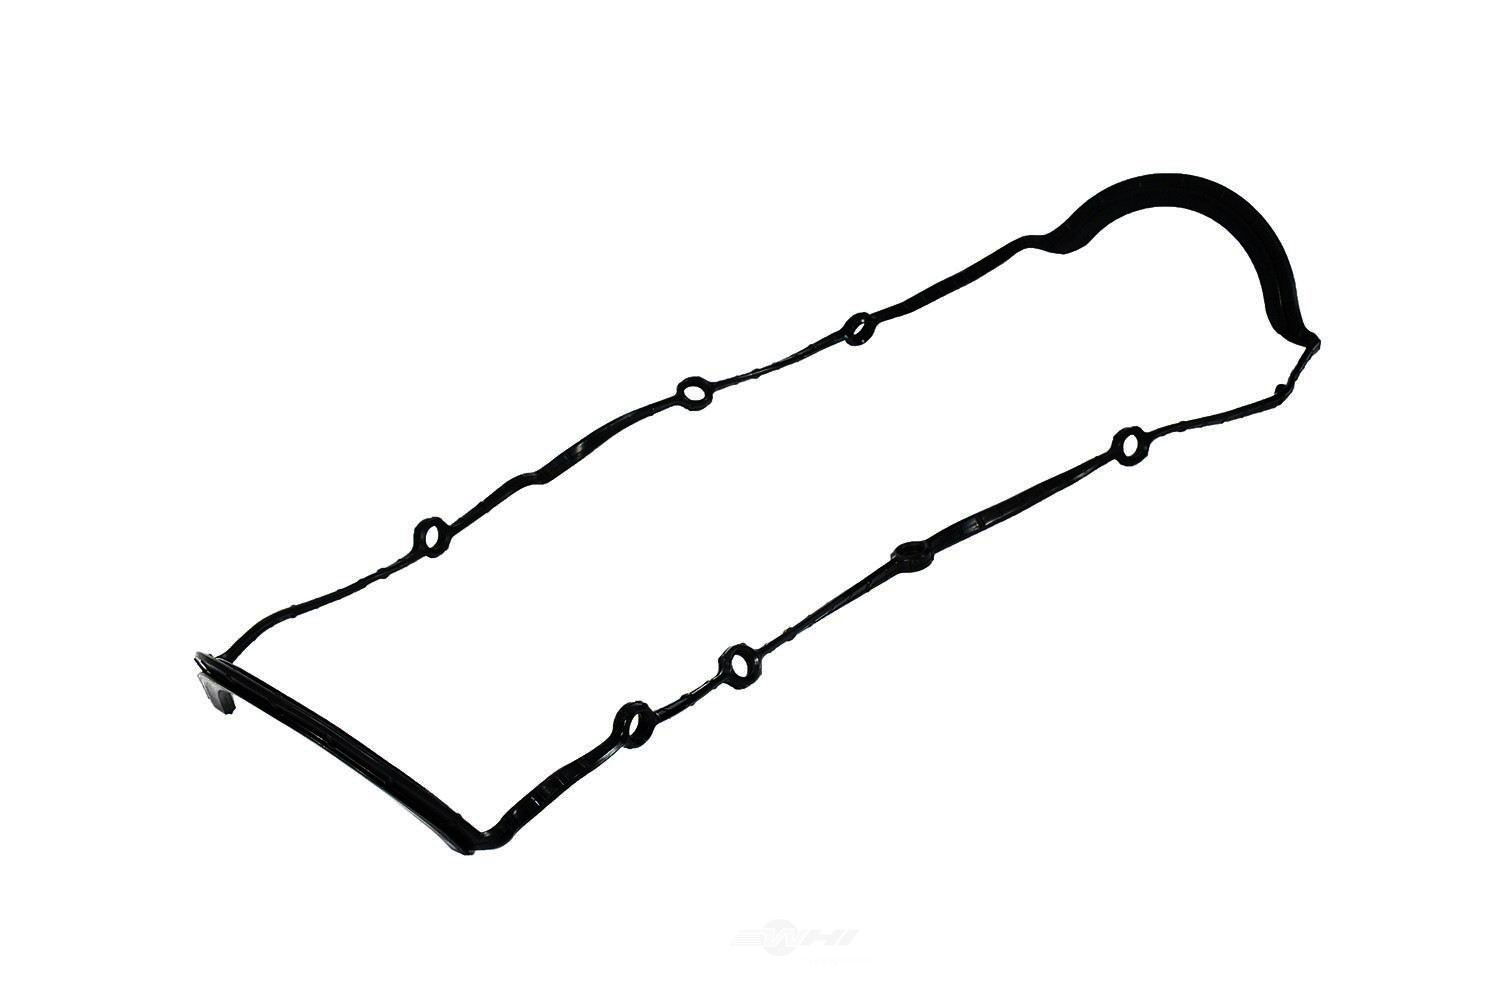 GM GENUINE PARTS - Engine Oil Pan Gasket - GMP 12602848